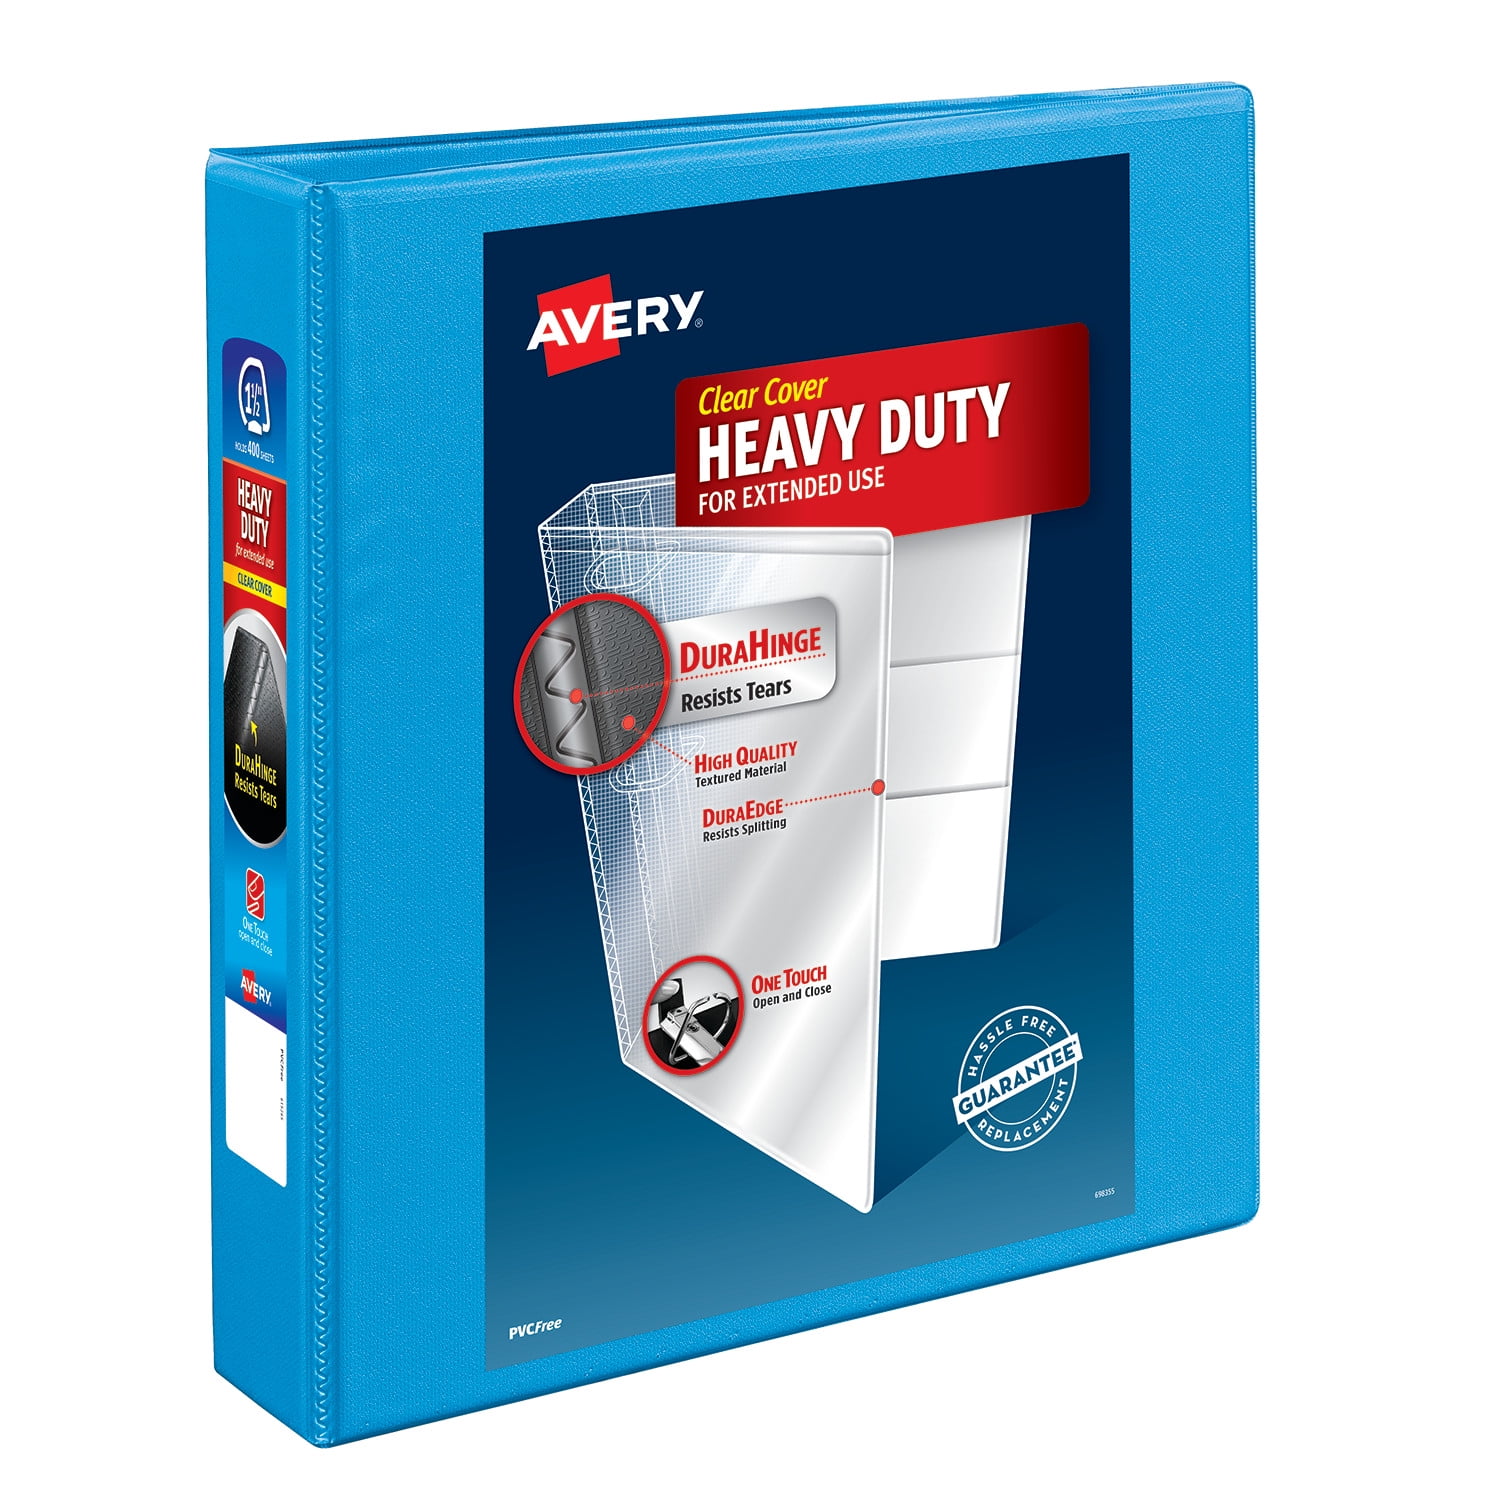 Letter Avery Durable 3-ring Poly Binder Pocket 8.50" X 11" 20 Sheet 